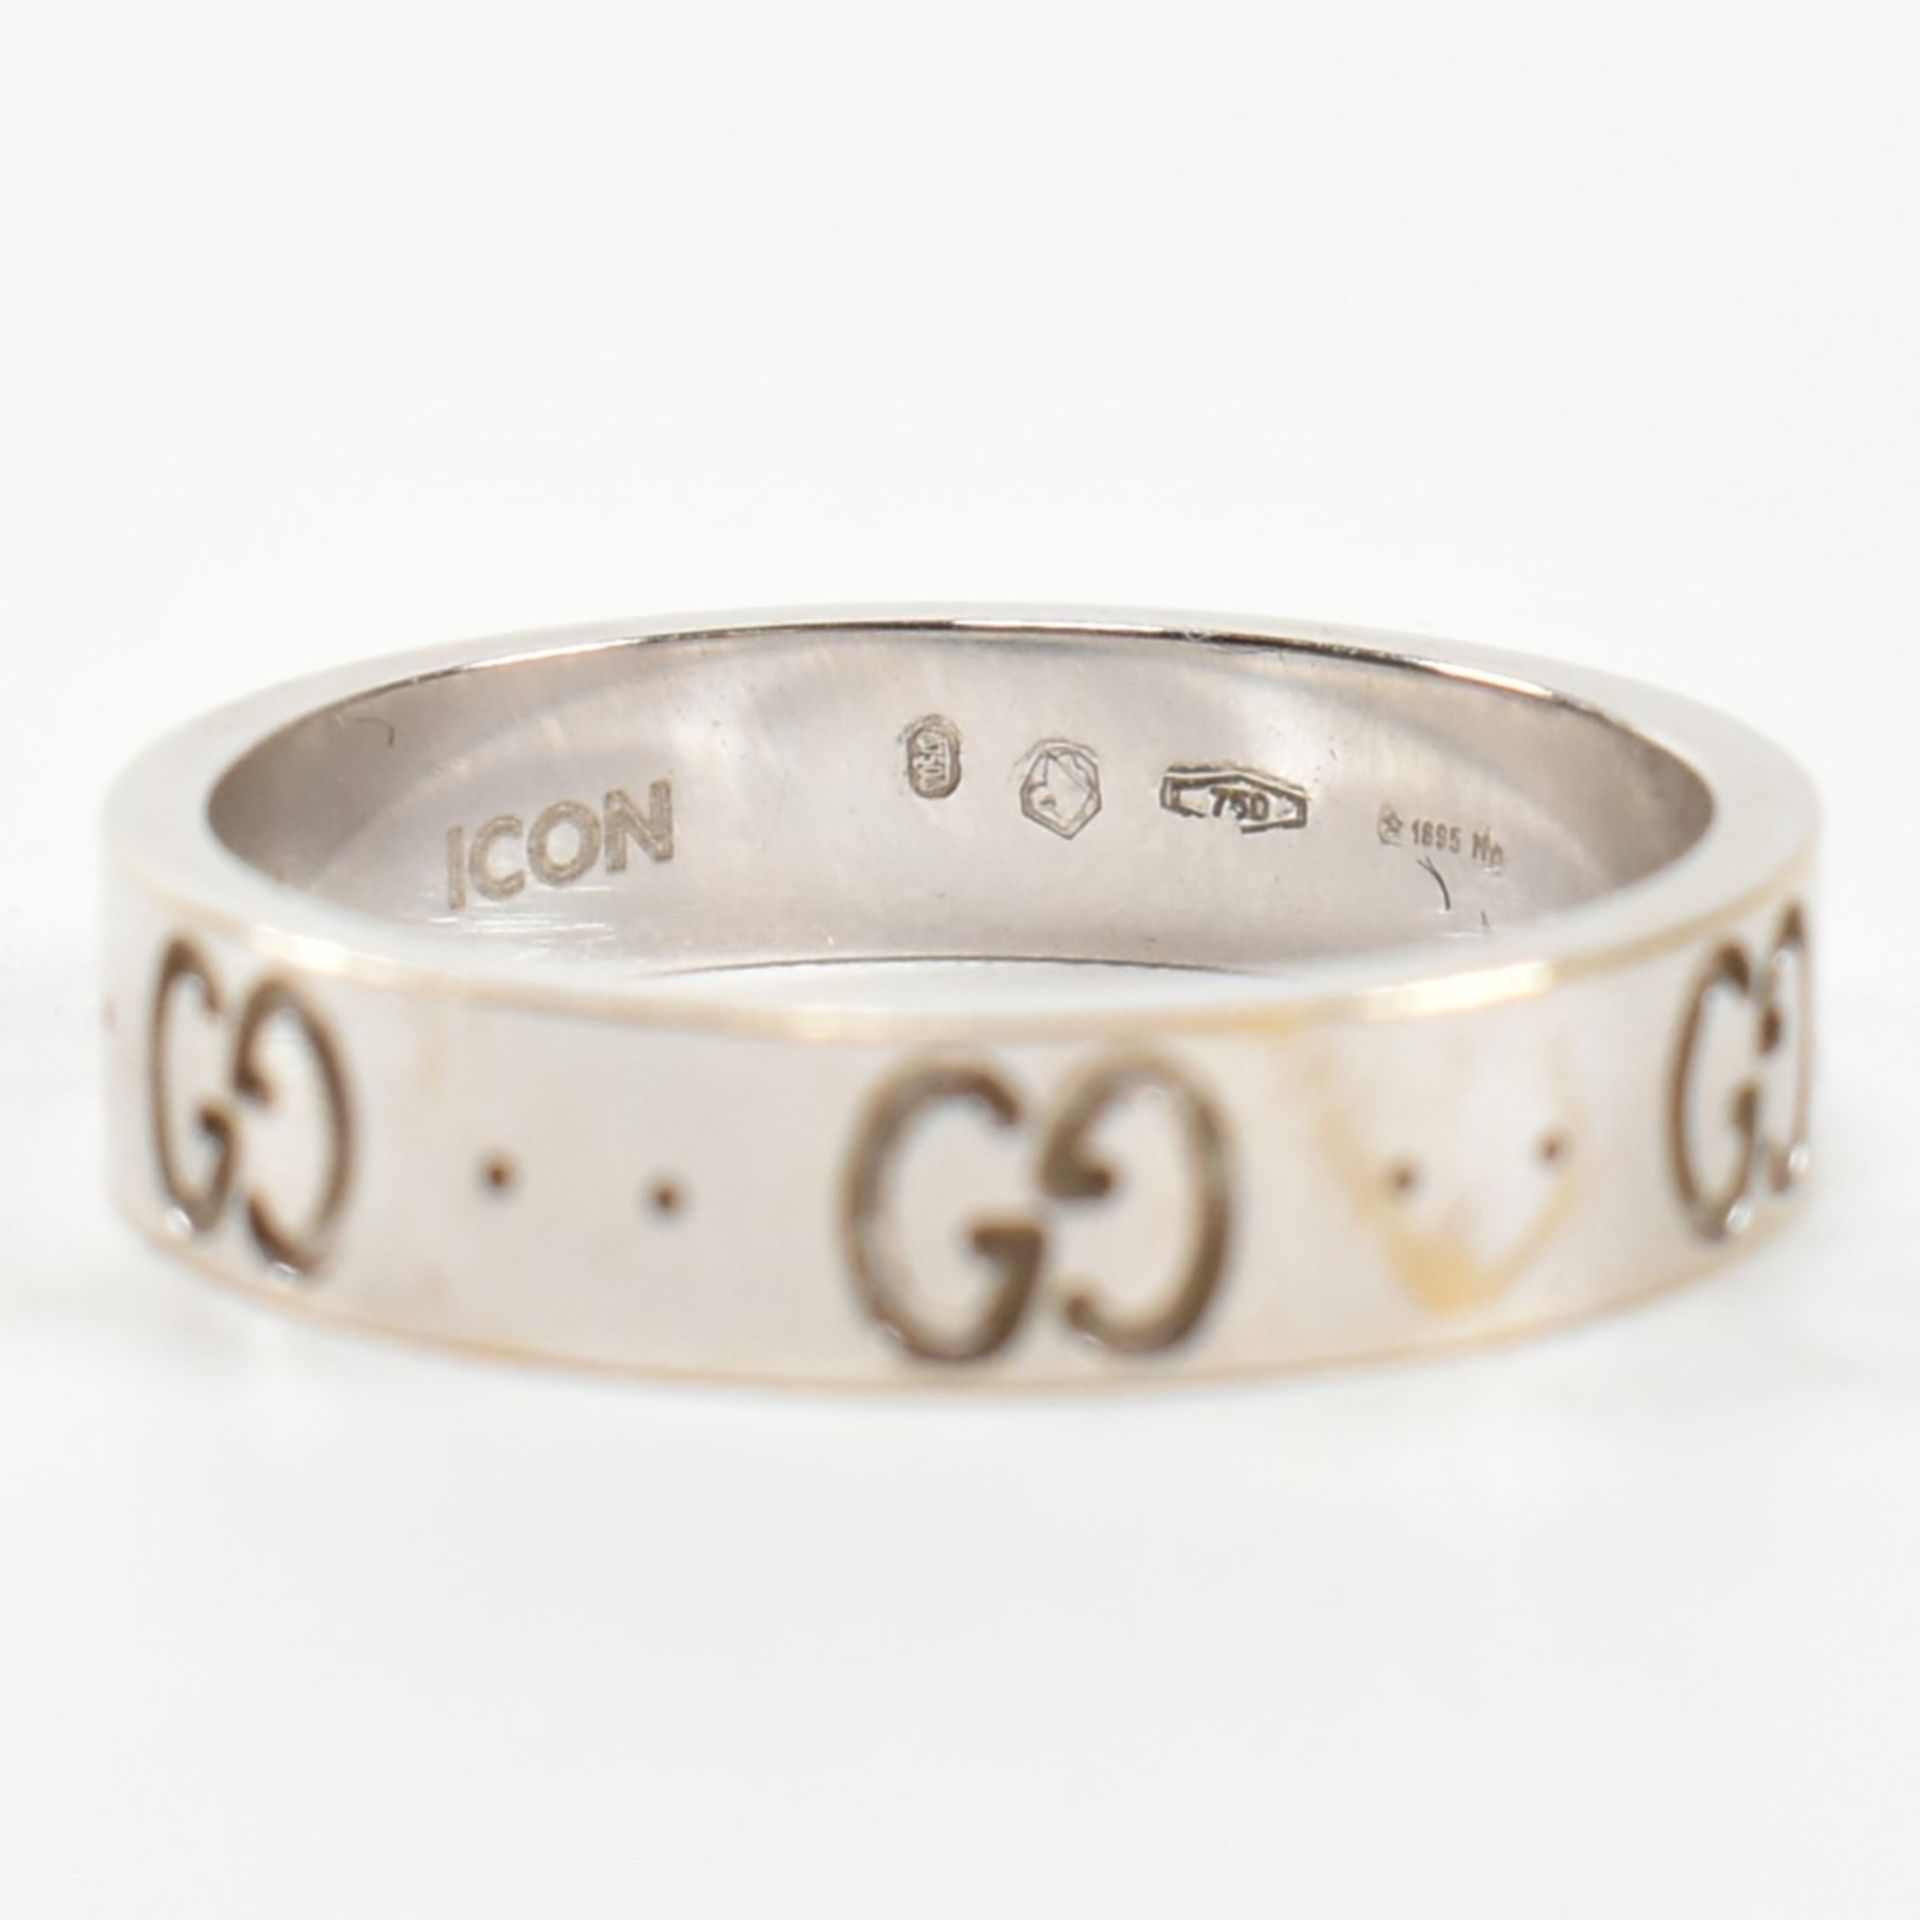 HALLMARKED 18CT WHITE GOLD GUCCI ICON BAND RING - Image 6 of 8